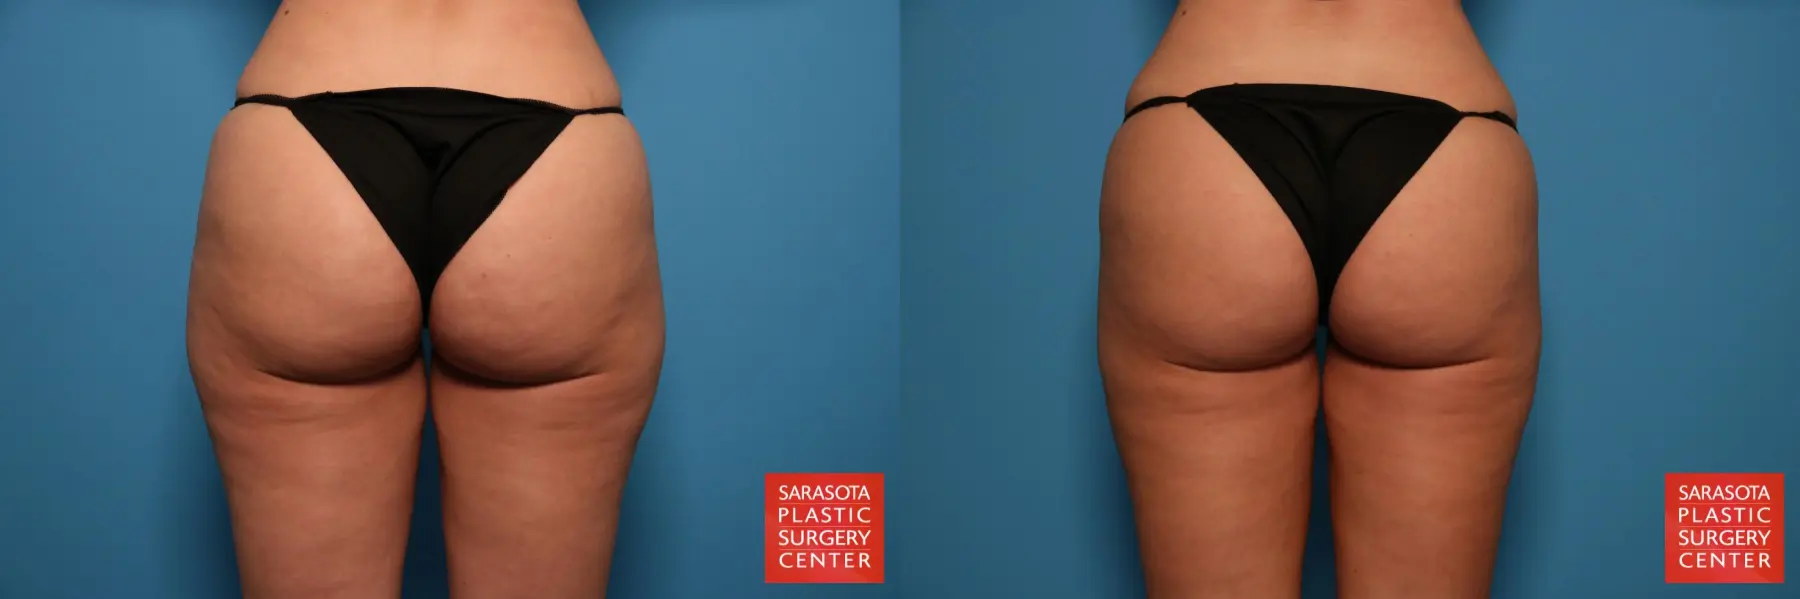 Liposuction: Patient 5 - Before and After 6